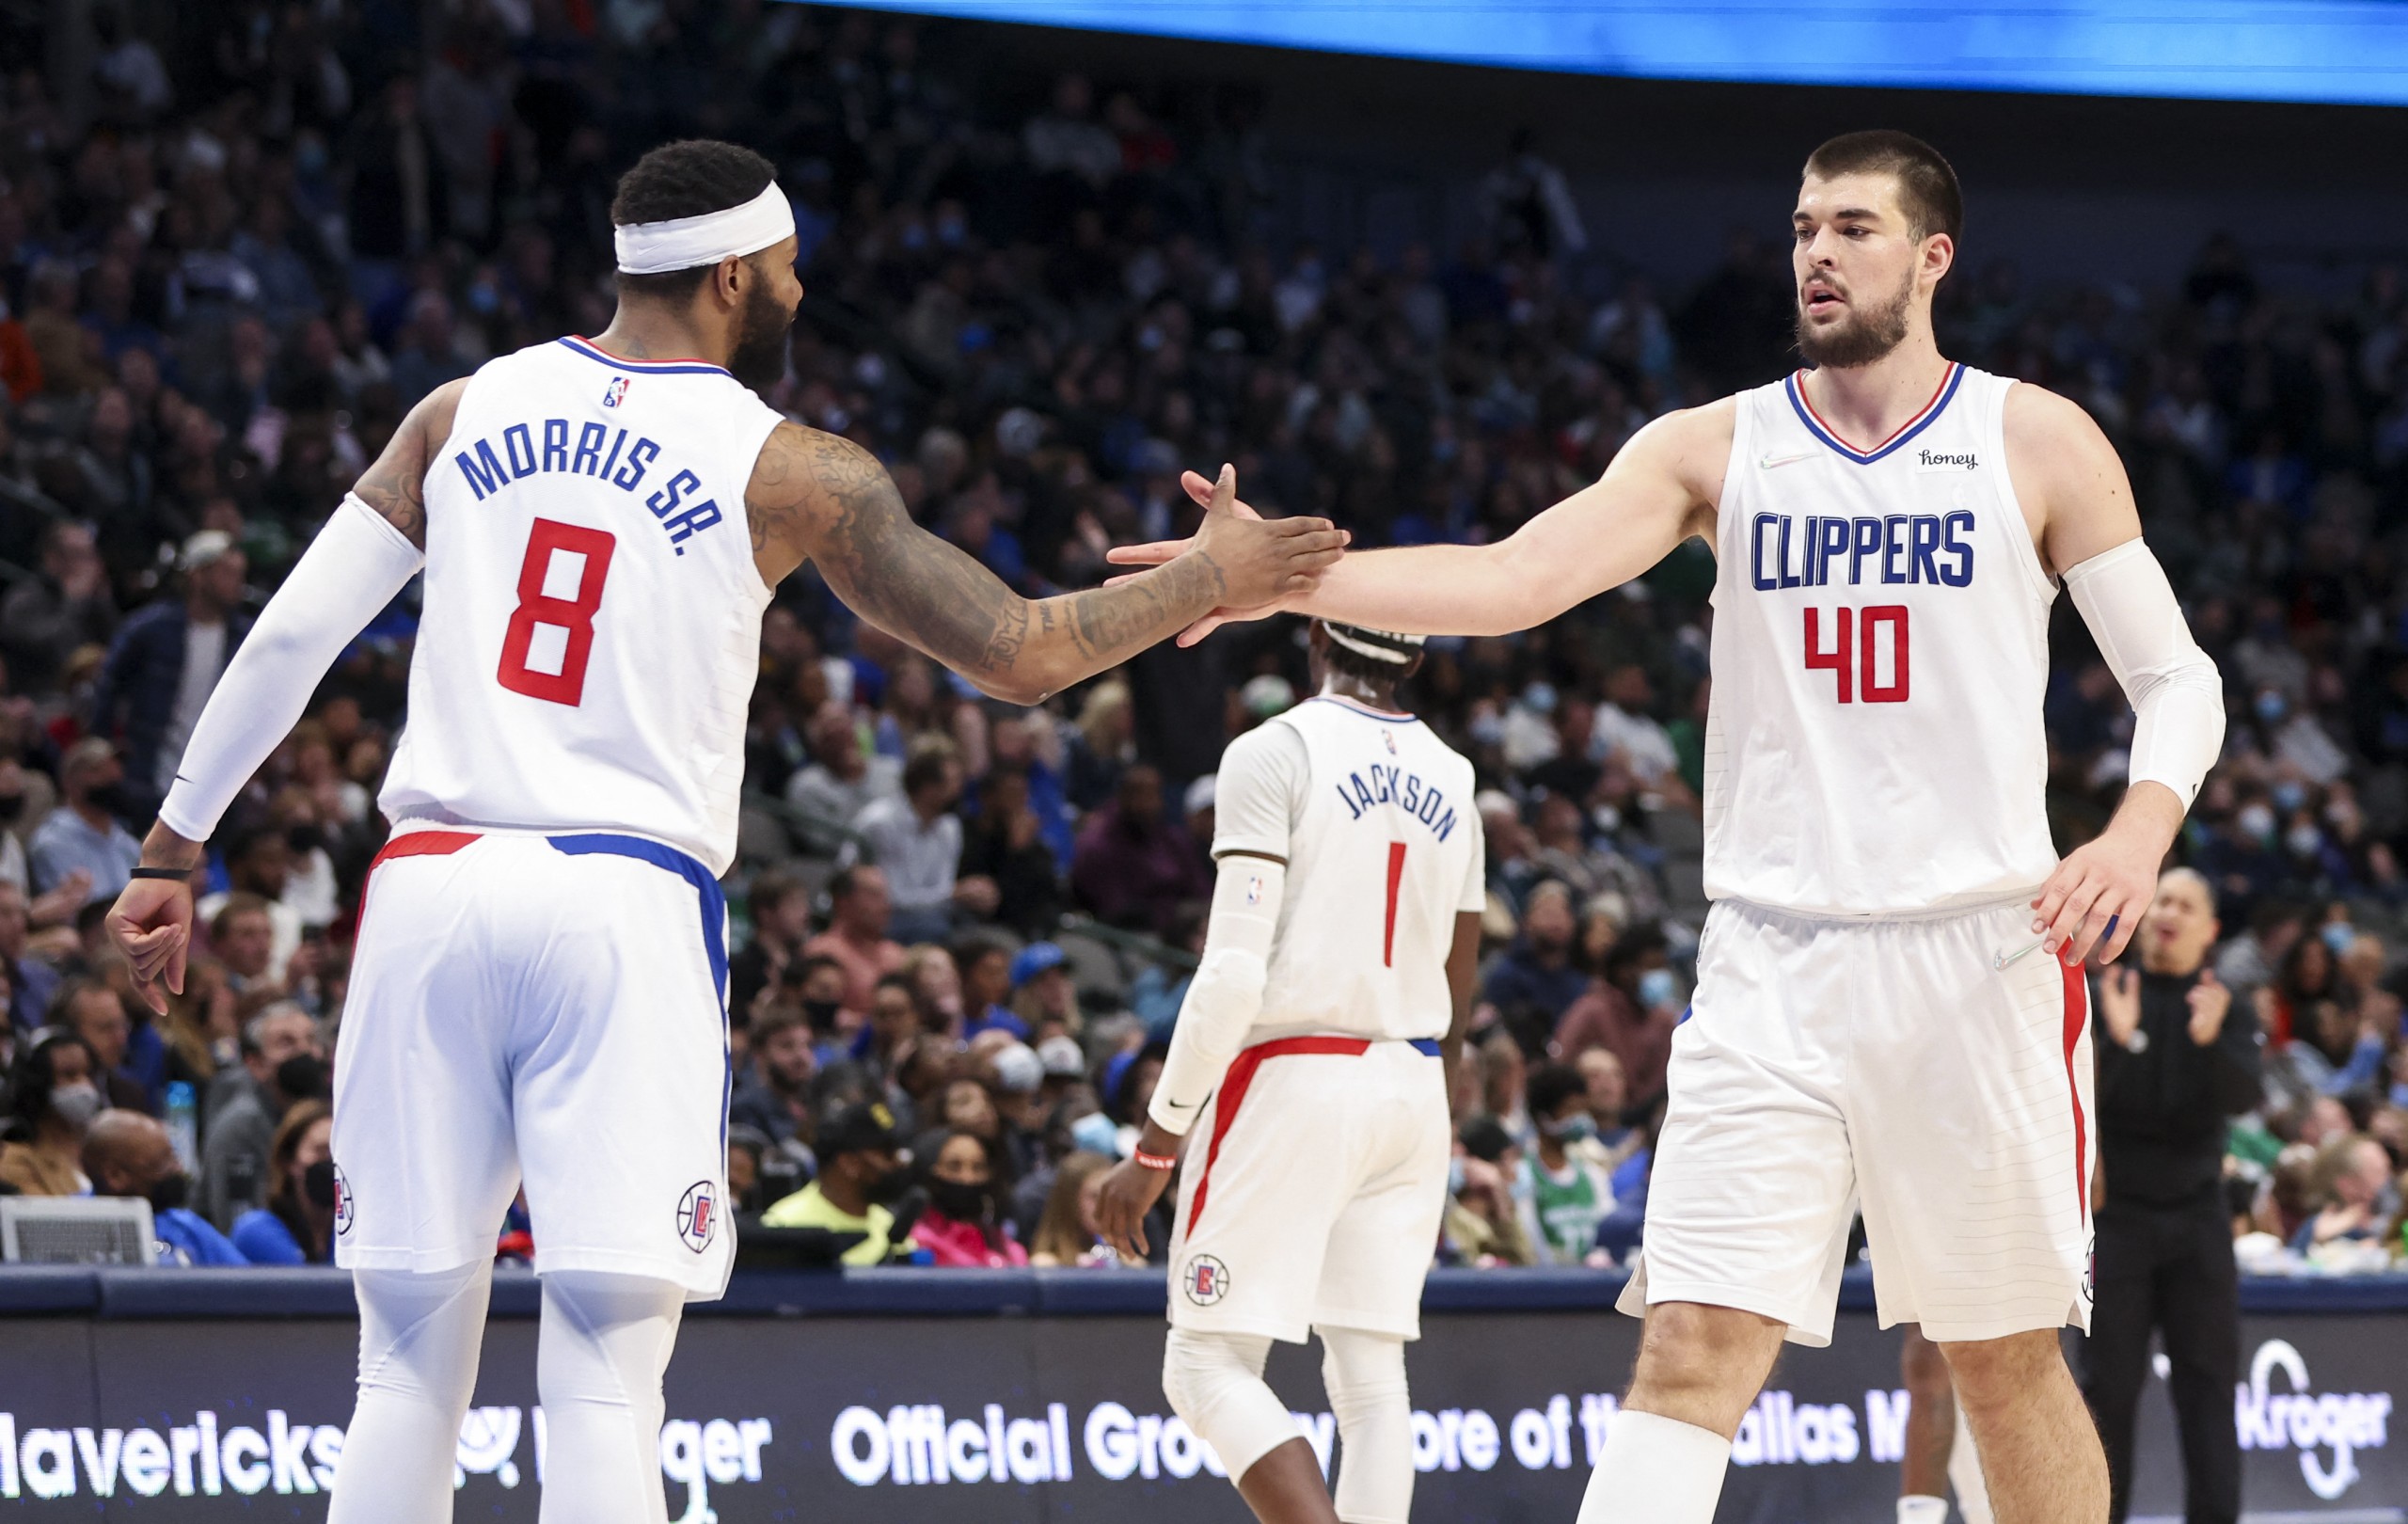 Feb 12, 2022; Dallas, Texas, USA;  LA Clippers center Ivica Zubac (40) and forward Marcus Morris Sr. (8) celebrate during the second half against the Dallas Mavericks at American Airlines Center. Mandatory Credit: Kevin Jairaj-USA TODAY Sports